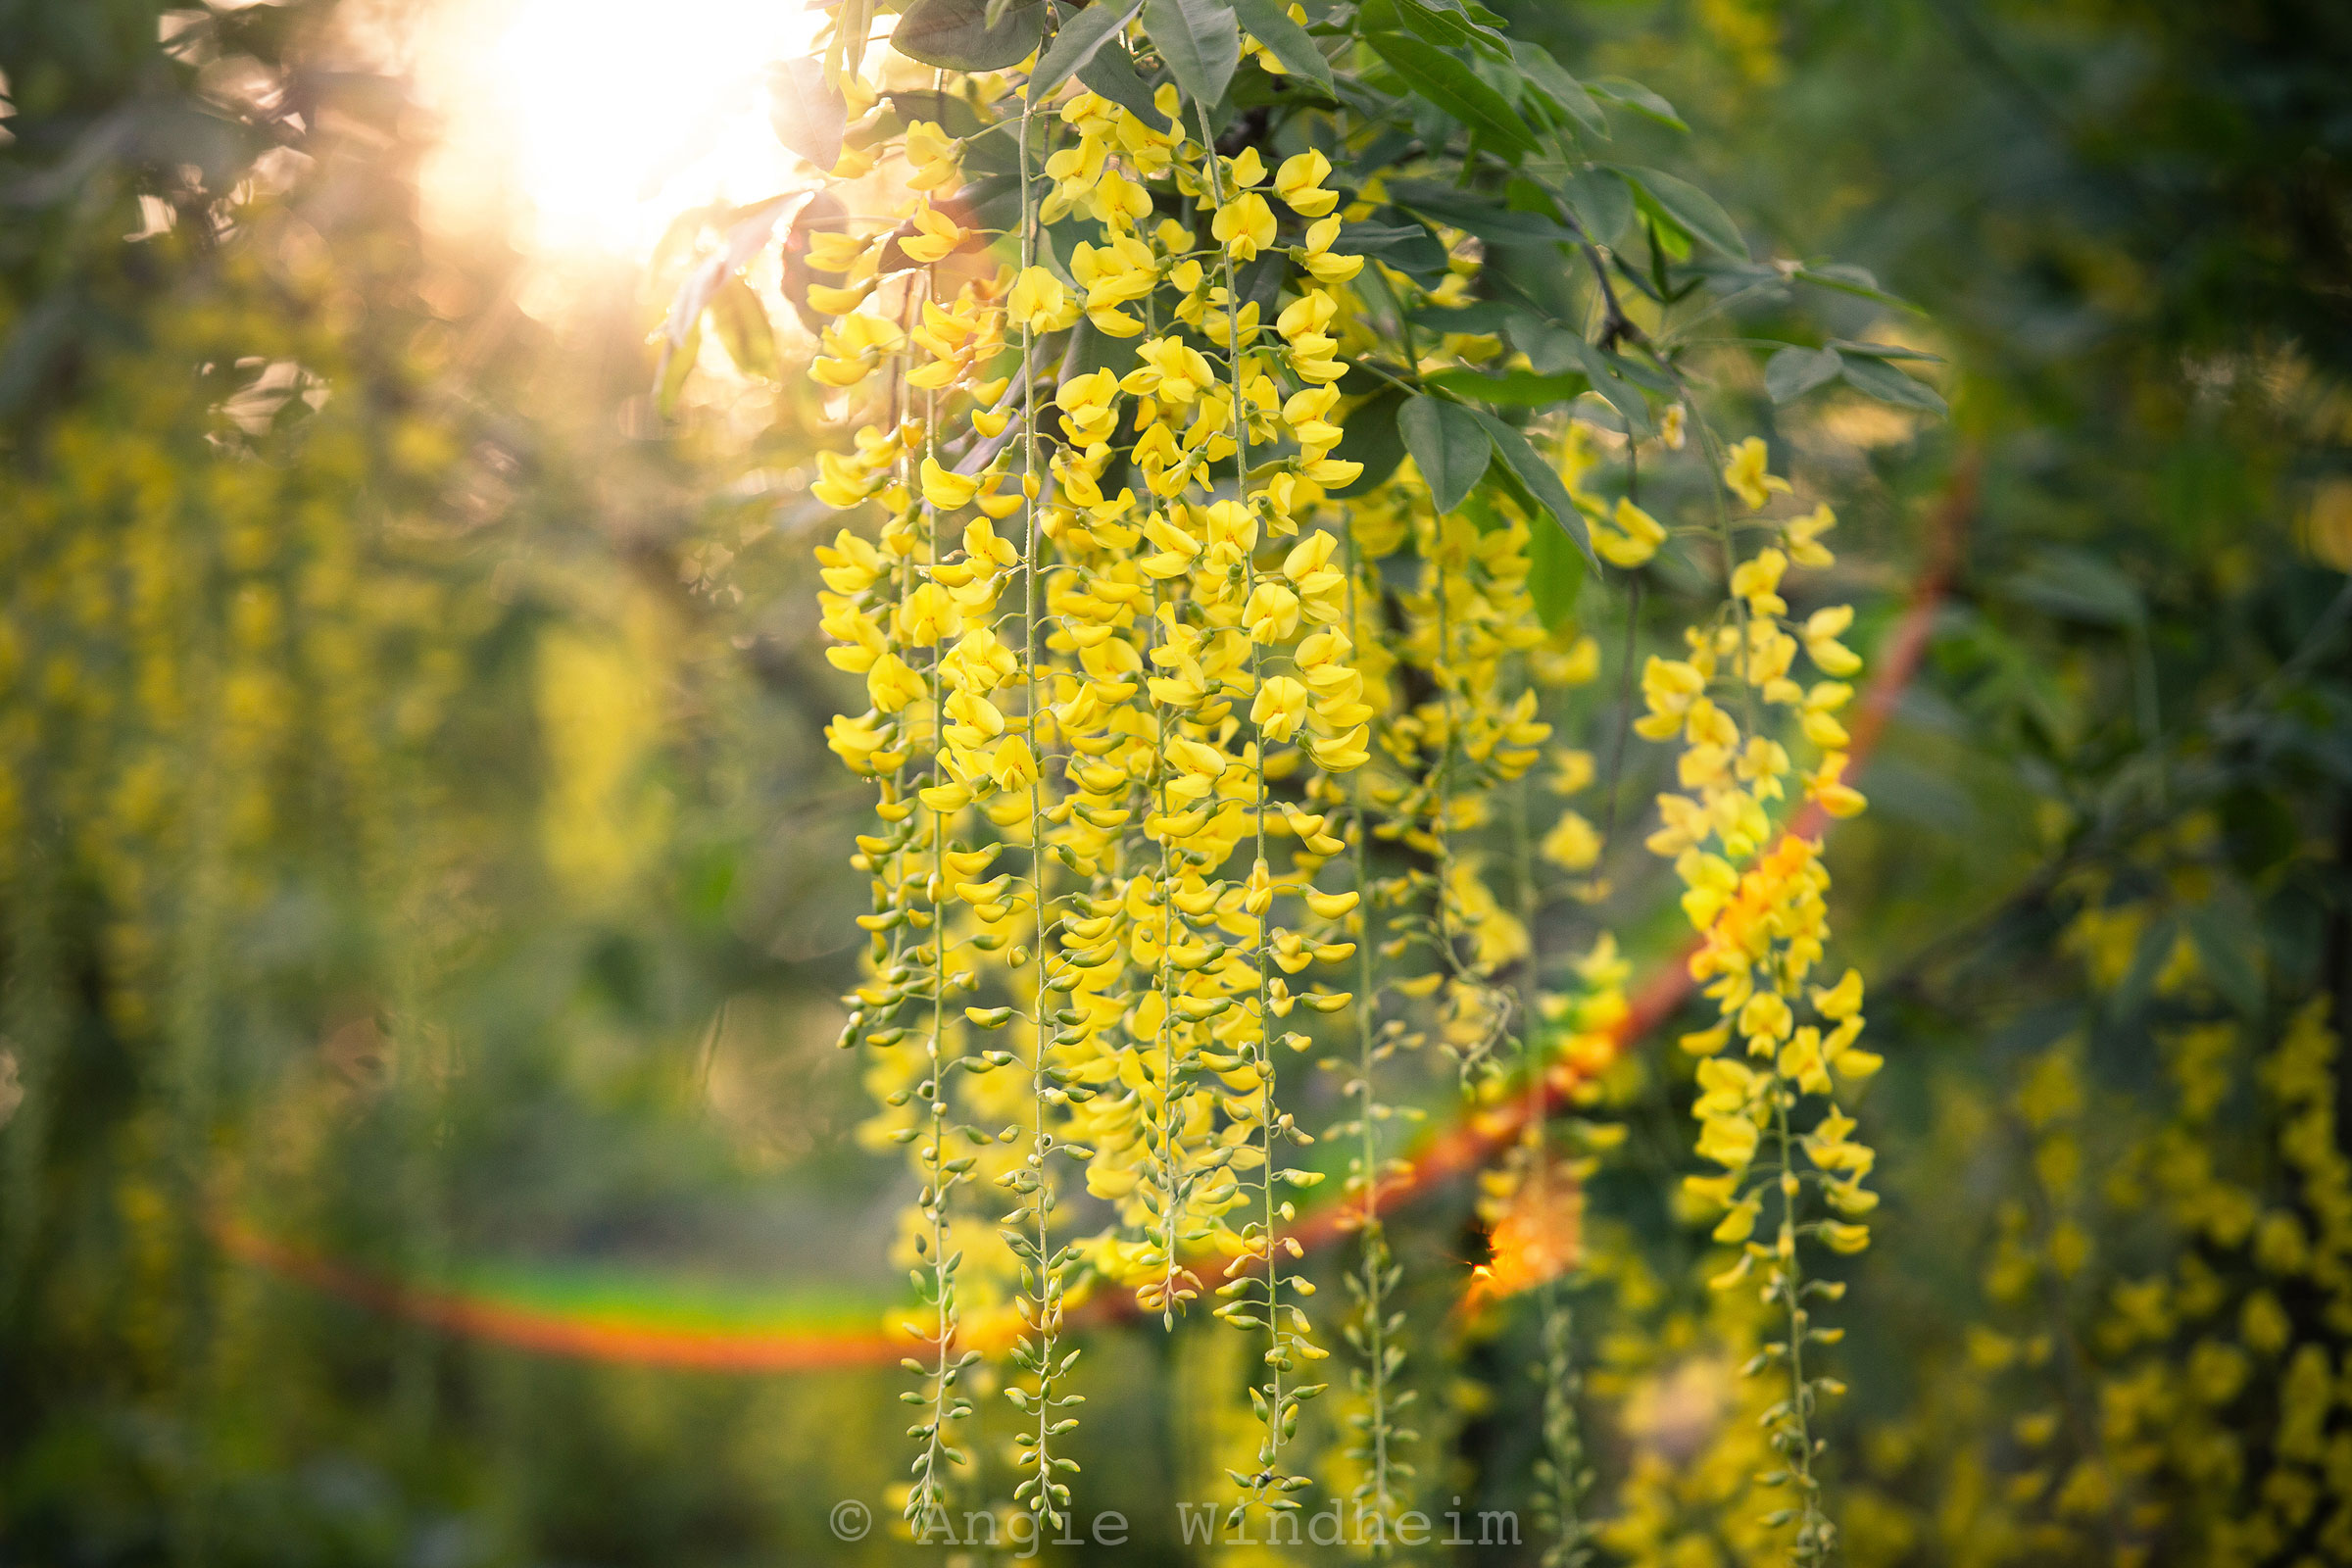 Flowers hang from a Golden Chain Tree in the morning sun with rainbow flare below them.